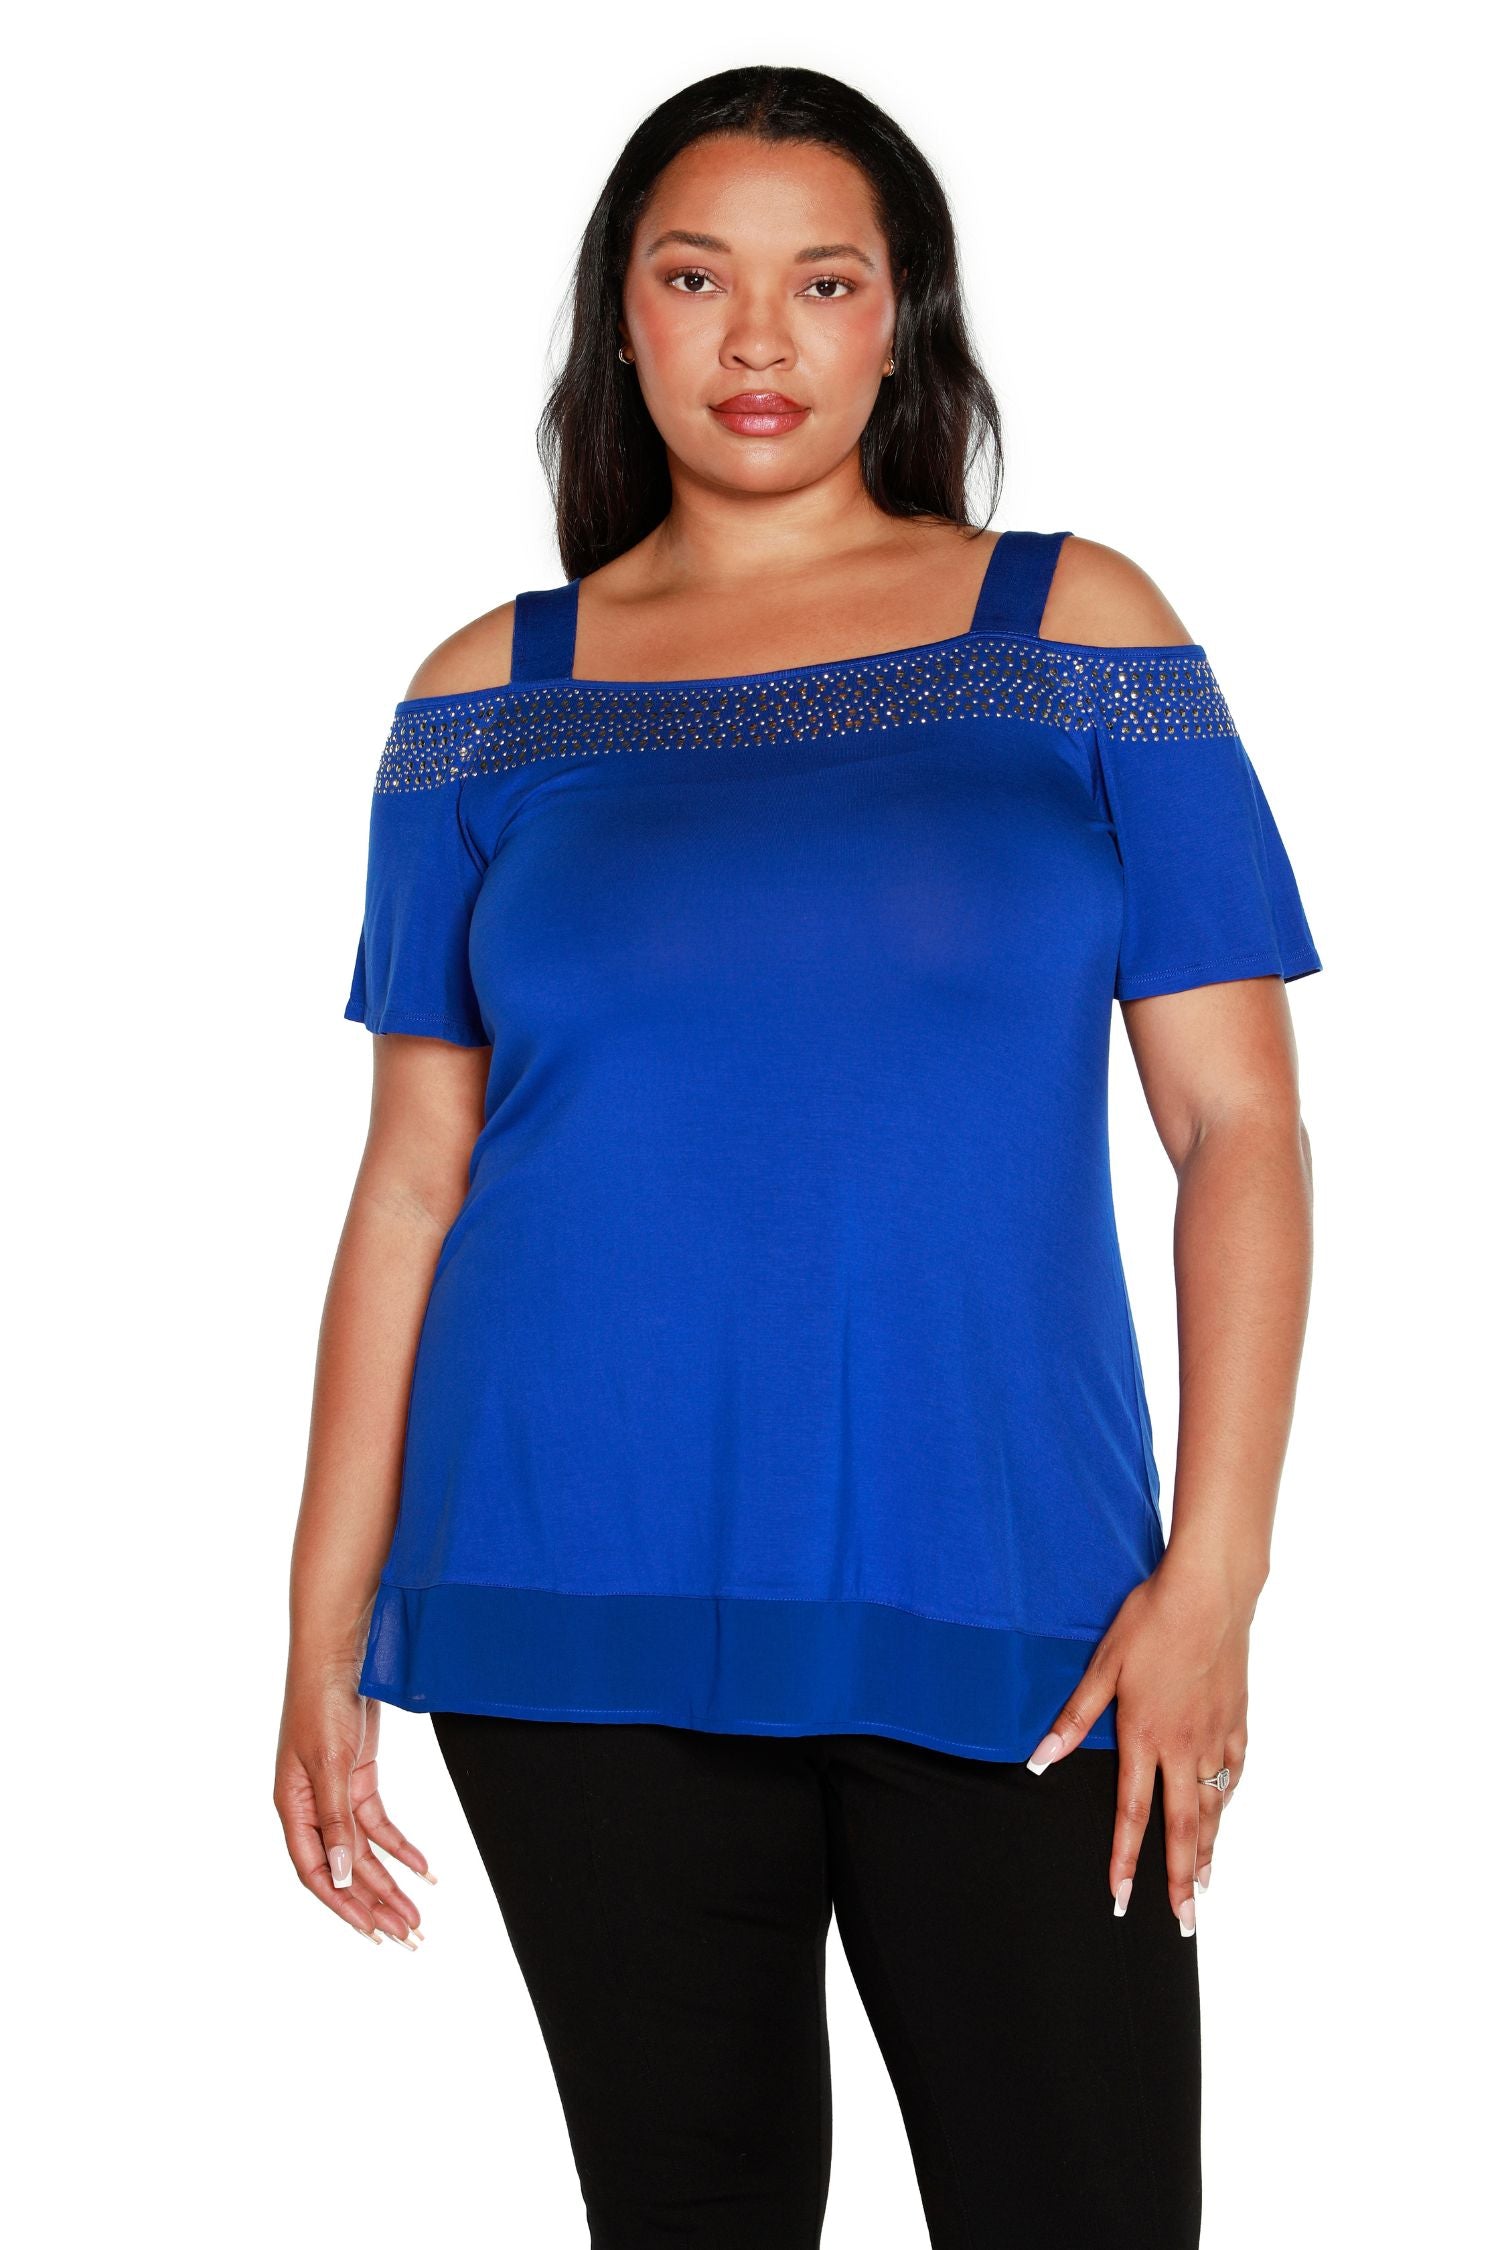 Women's Cold Shoulder Pull Over Top with Flutter Sleeves and Stud and Sequin Trim | Curvy